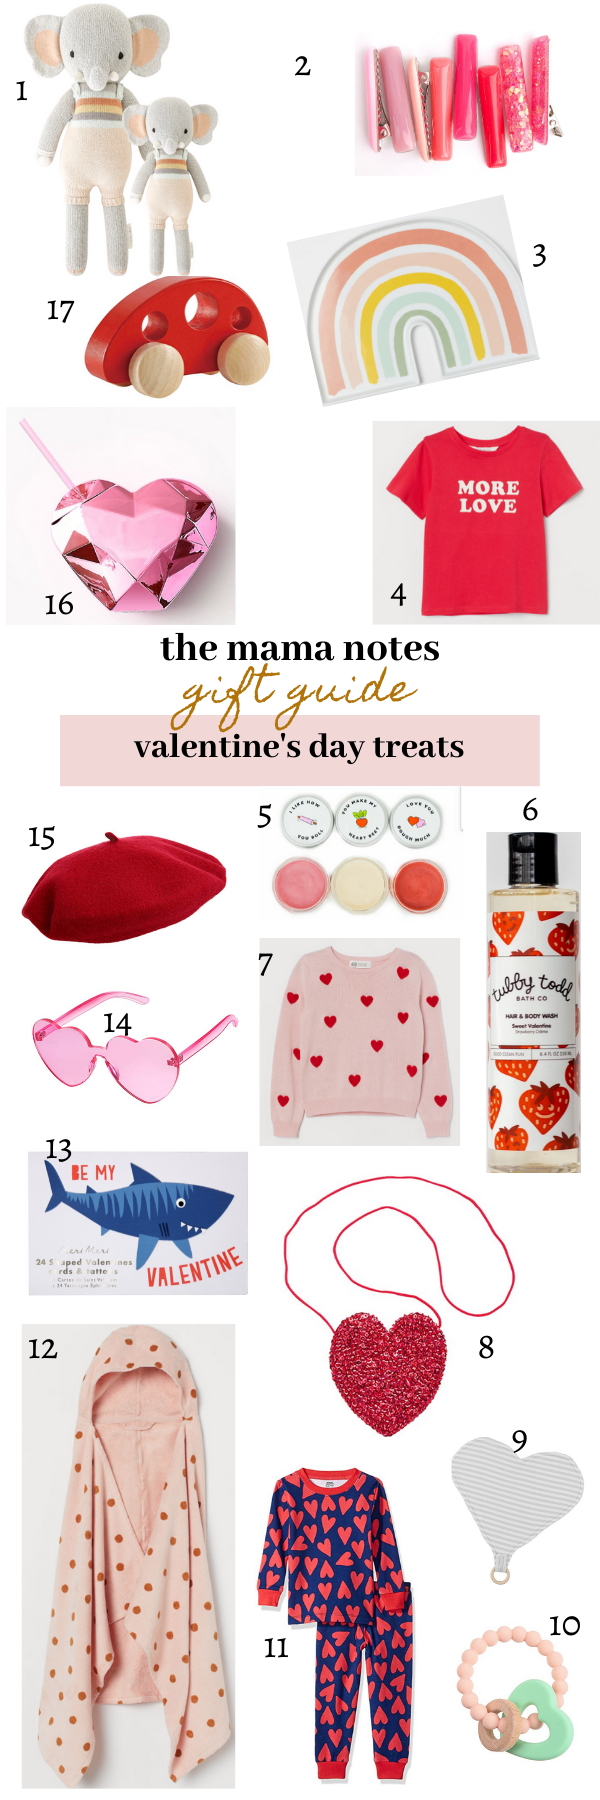 https://themamanotes.com/wp-content/uploads/2020/01/valentines-day-gifts.png